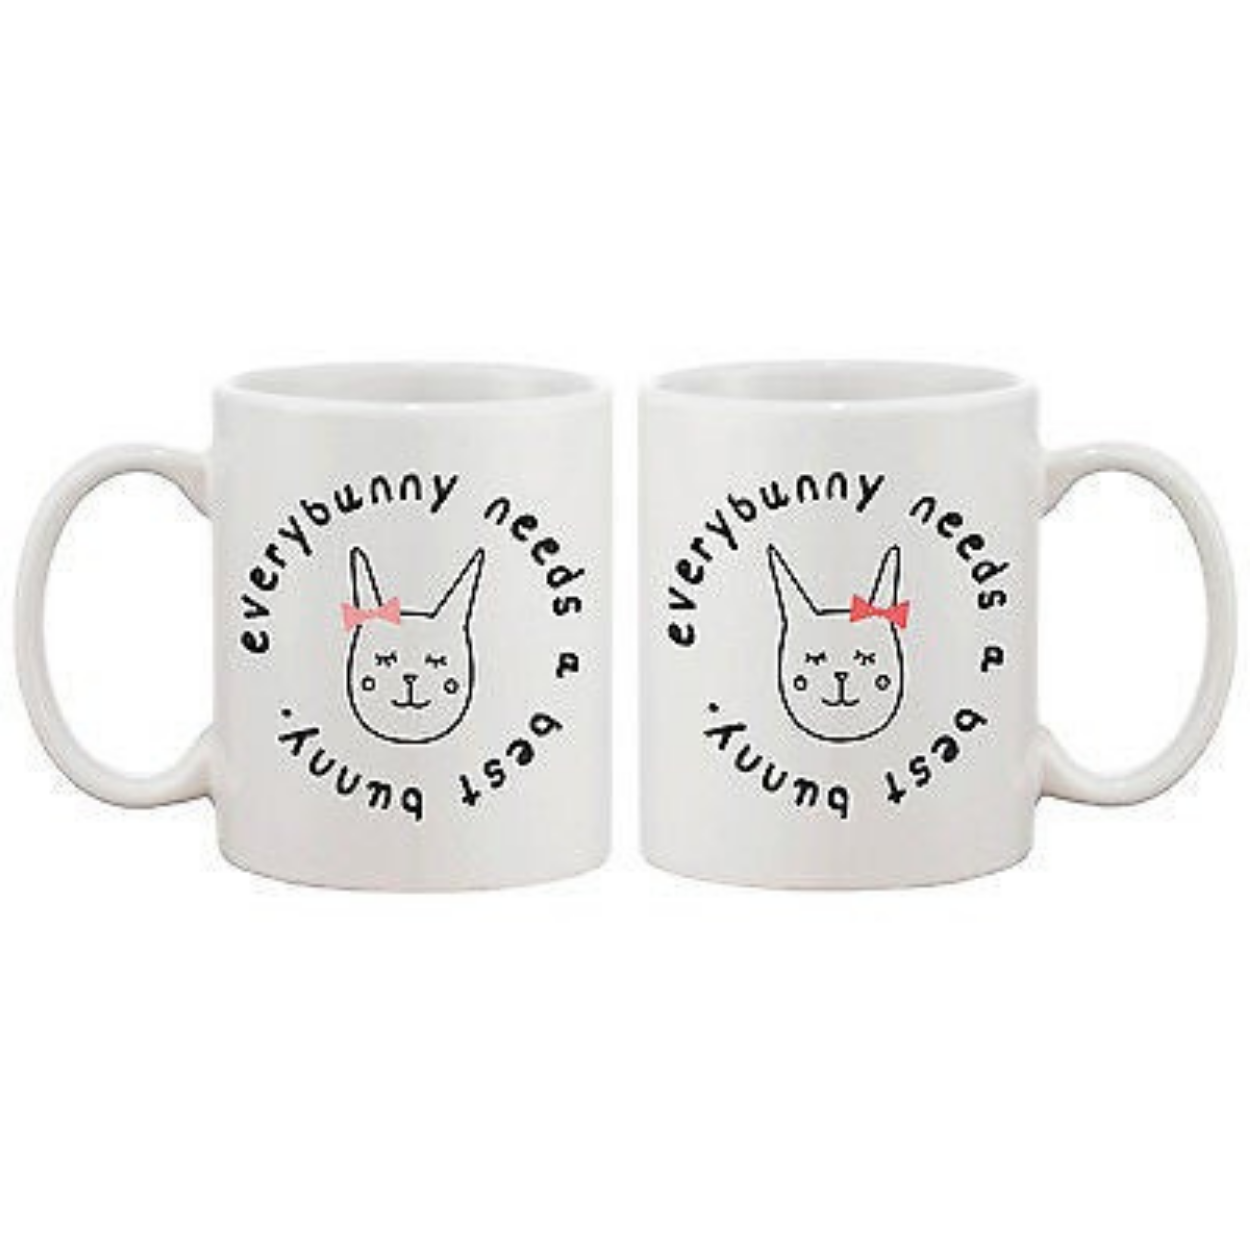 Cute BFF Coffee Mugs for Best Friends - Every Bunny Needs a Best Bunny Cup White